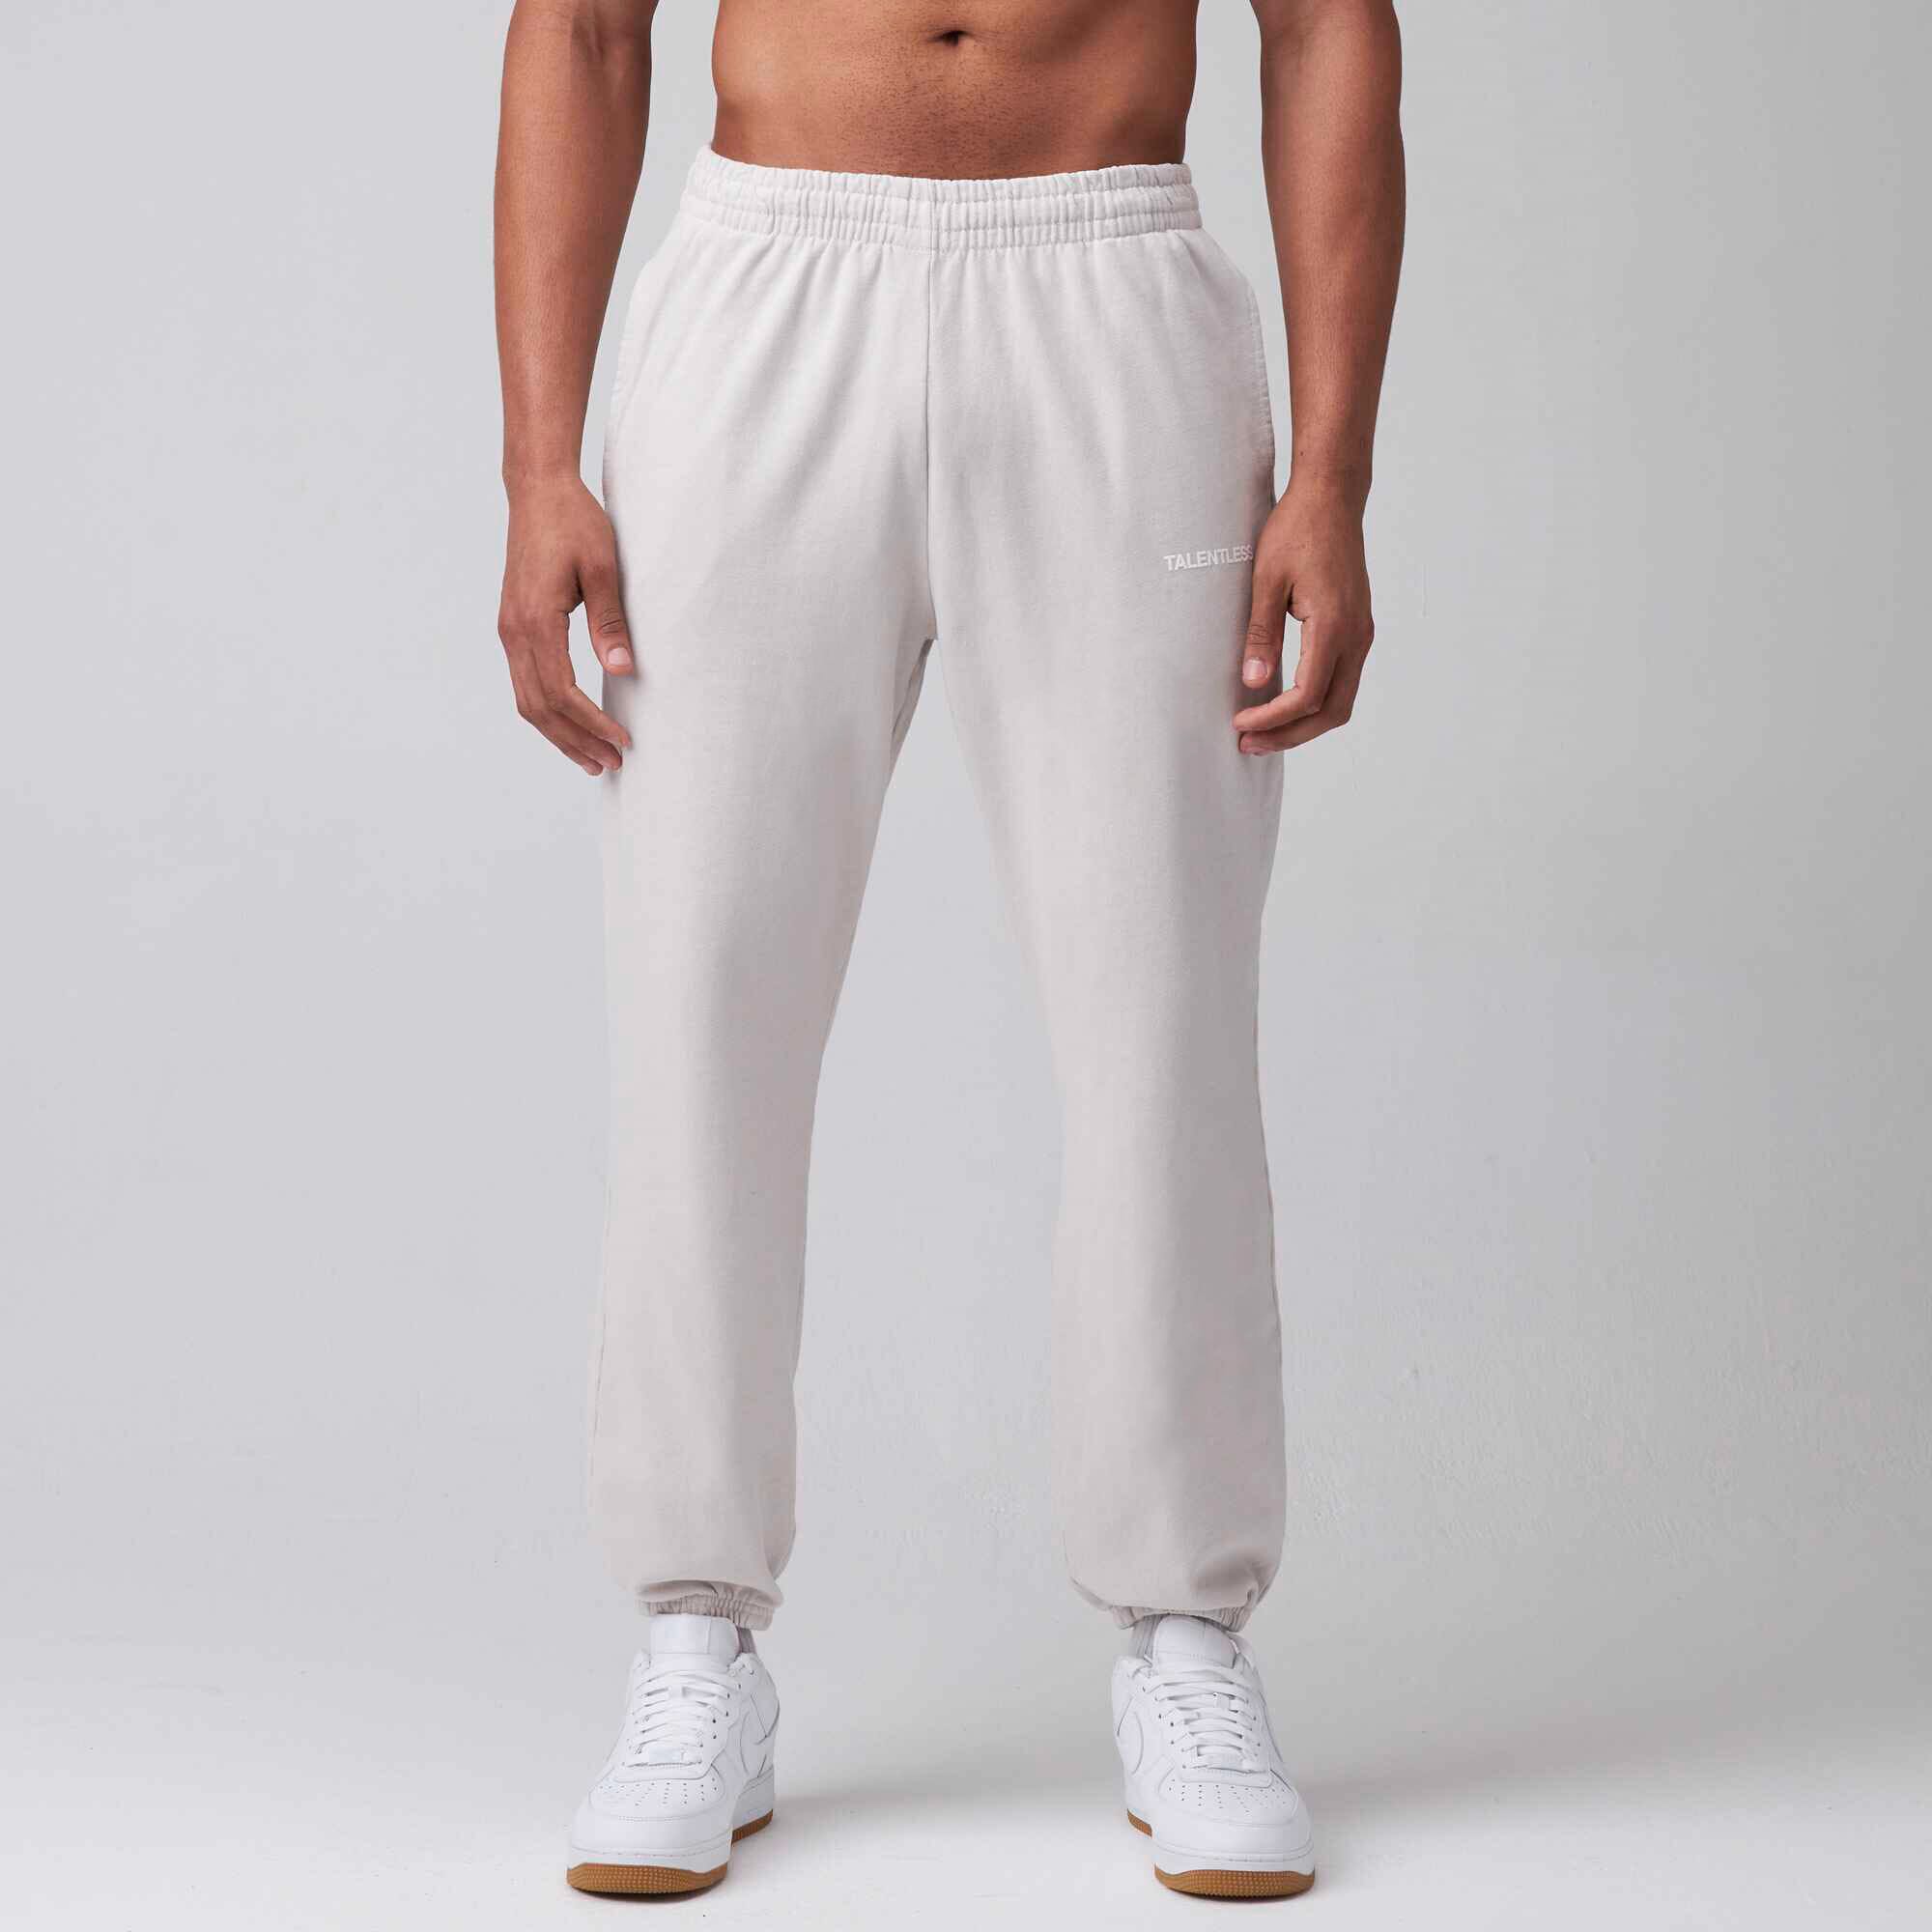 Mens Thin Polyester Track Sweatpants Easy Cuffless Casual Running